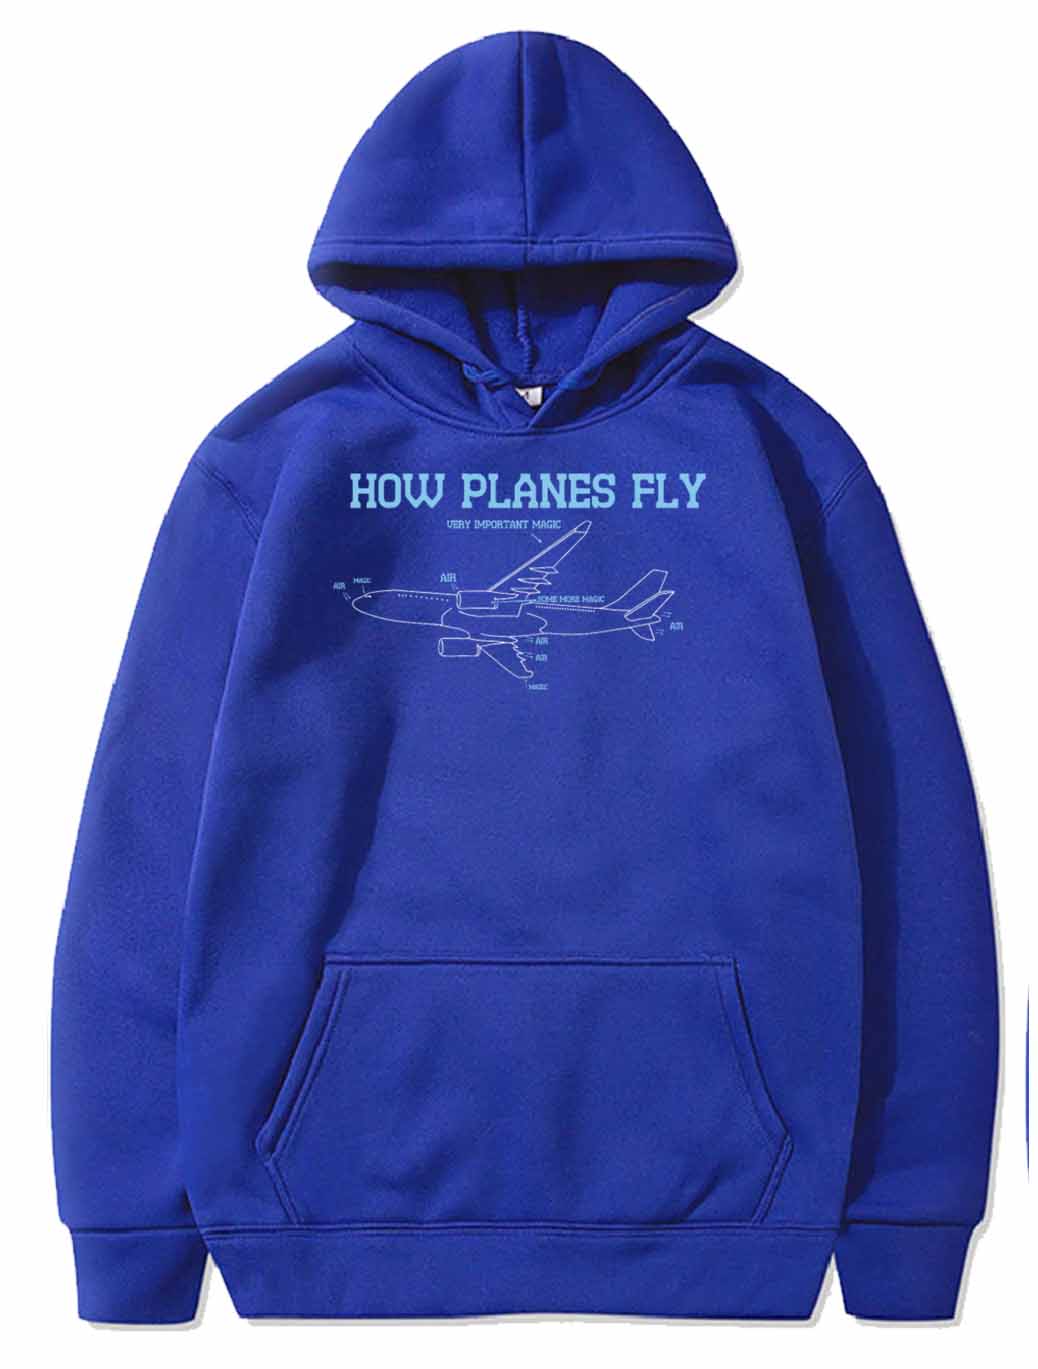 Cool AEROSPACE ENGINEER Tee How Planes Fly PULLOVER THE AV8R